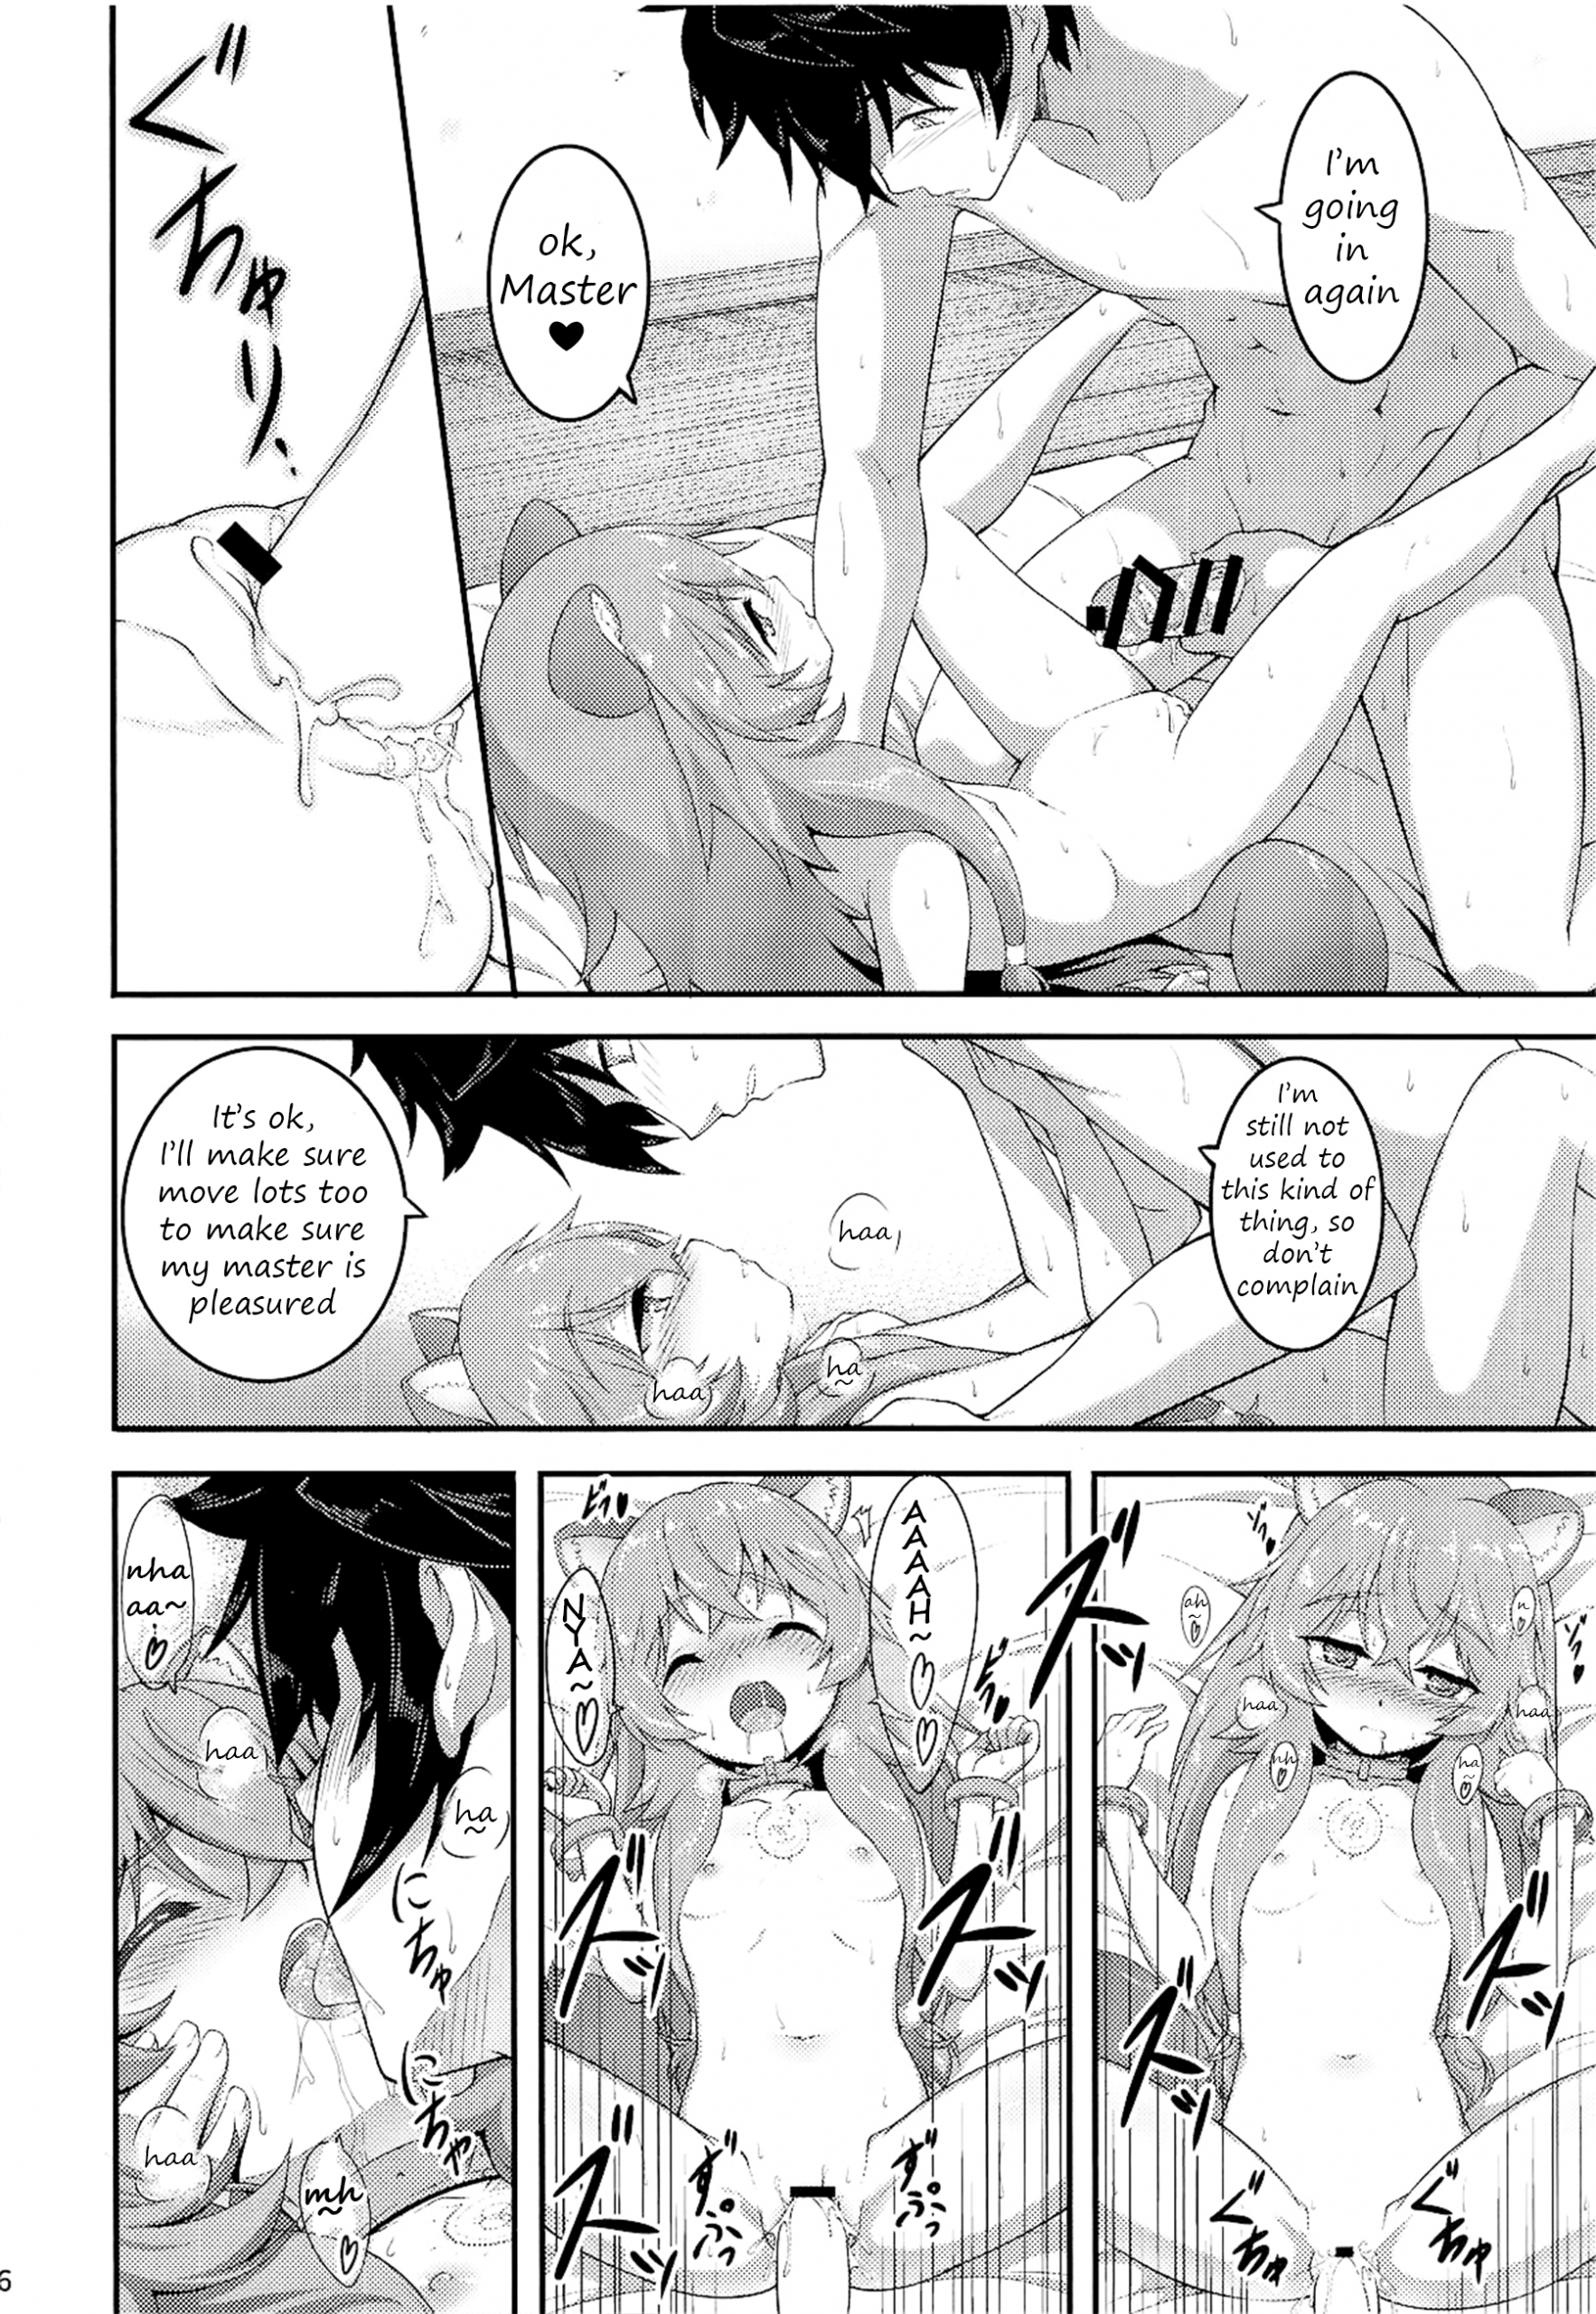 Slave's Girl of Level 1 hentai manga picture 15